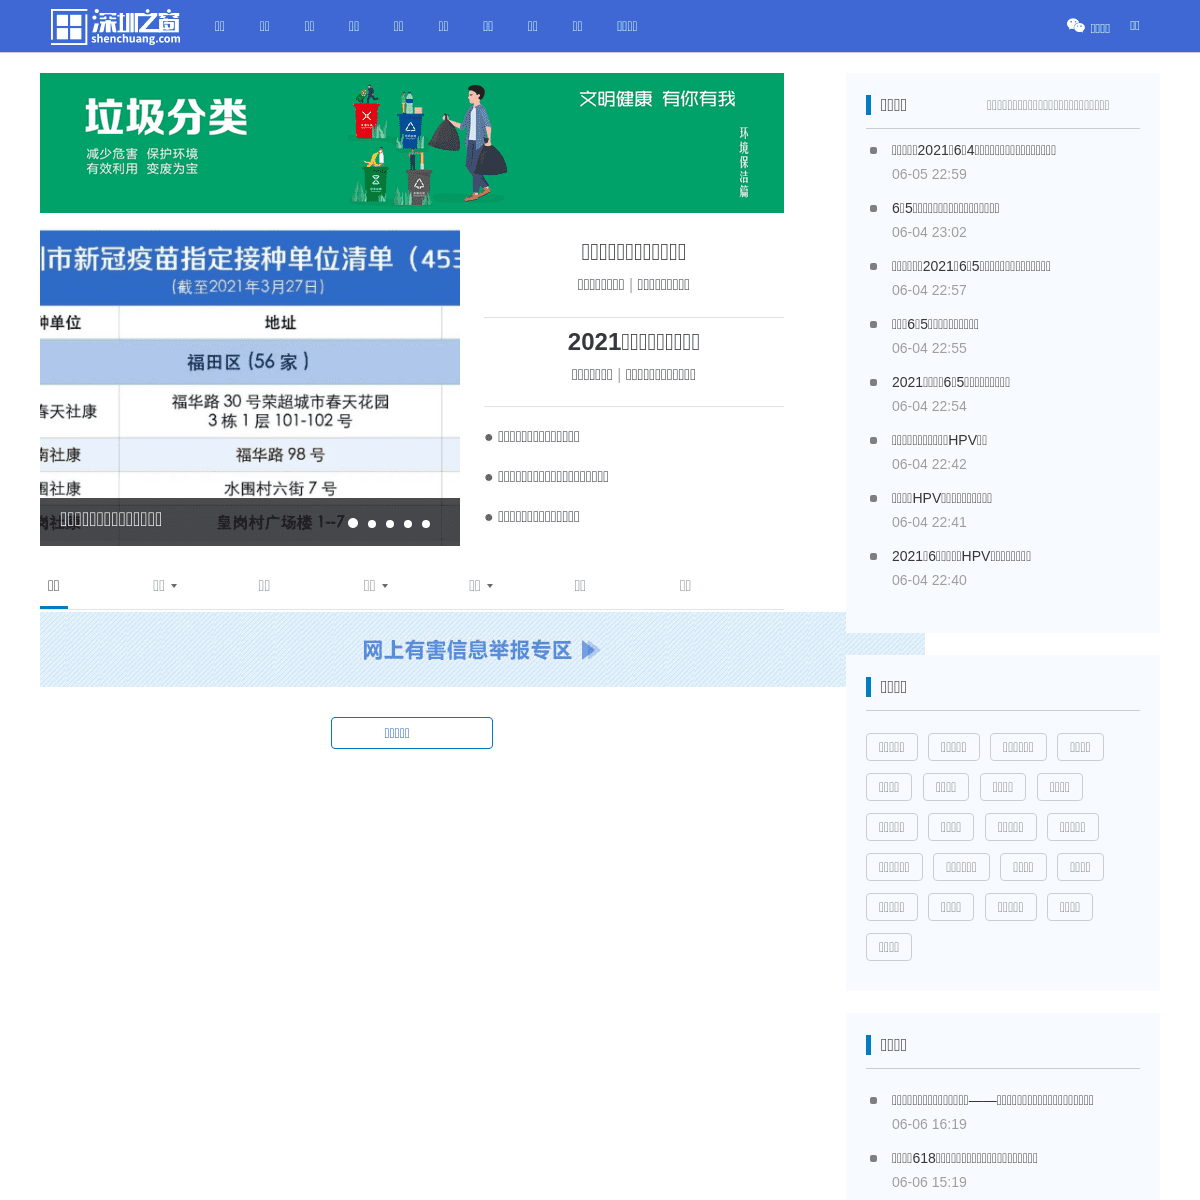 A complete backup of https://shenchuang.com